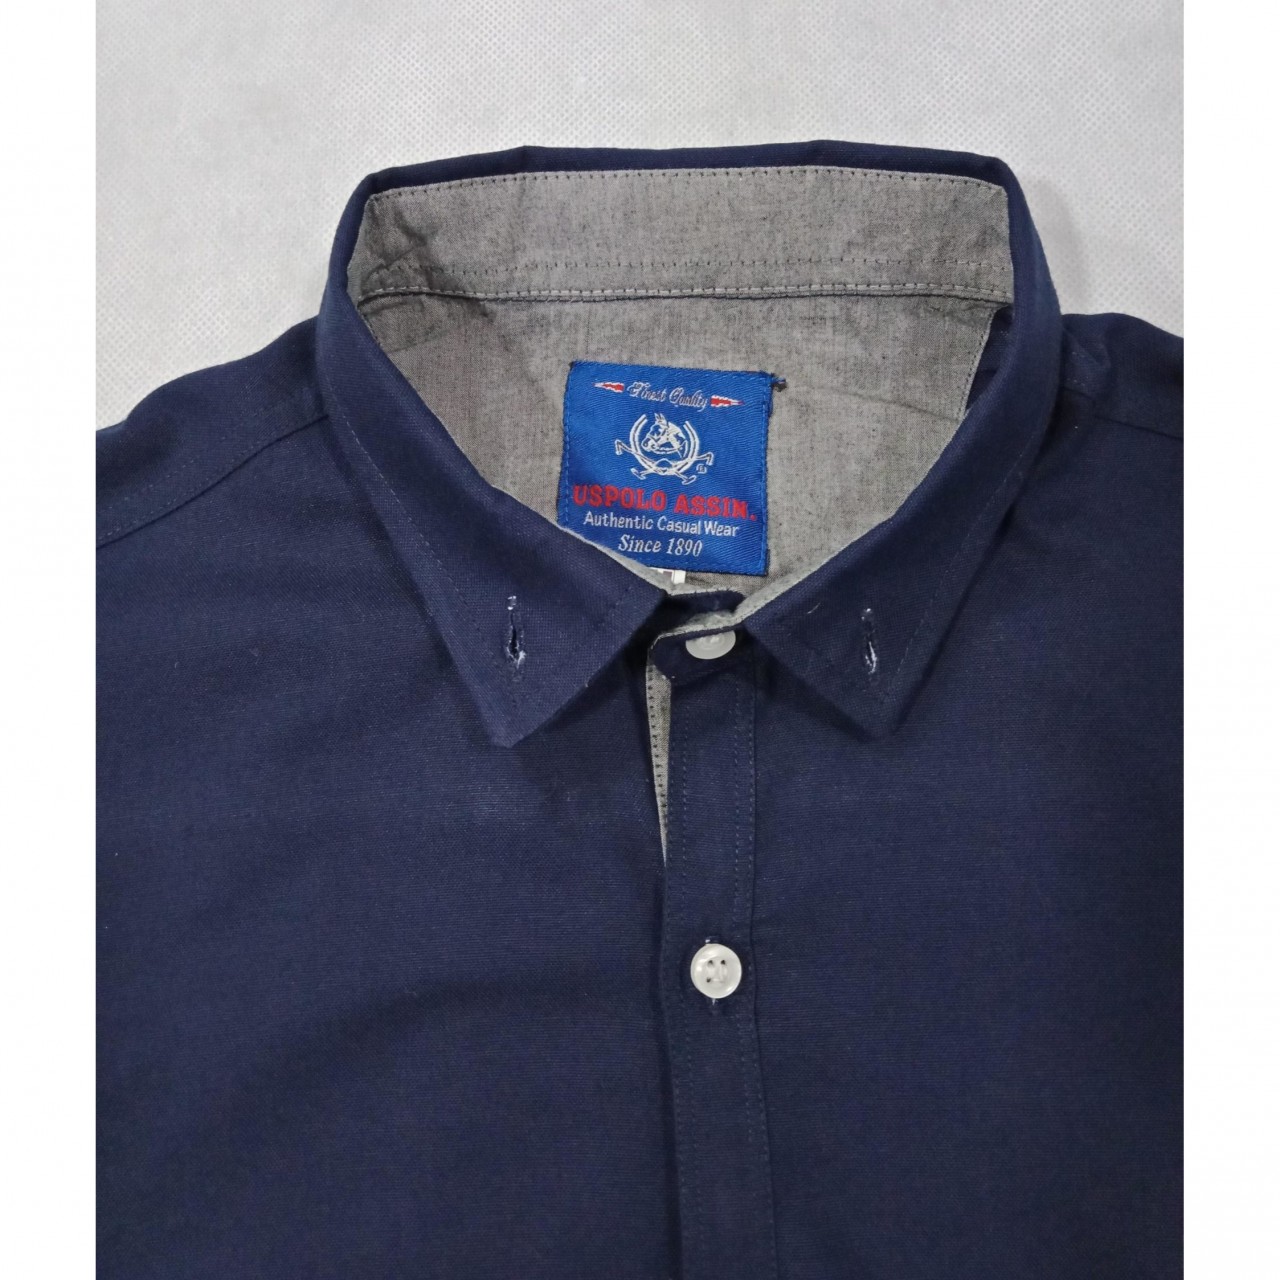 Blue Polo Casual Button Down Shirt Perfect for Casual Wearing